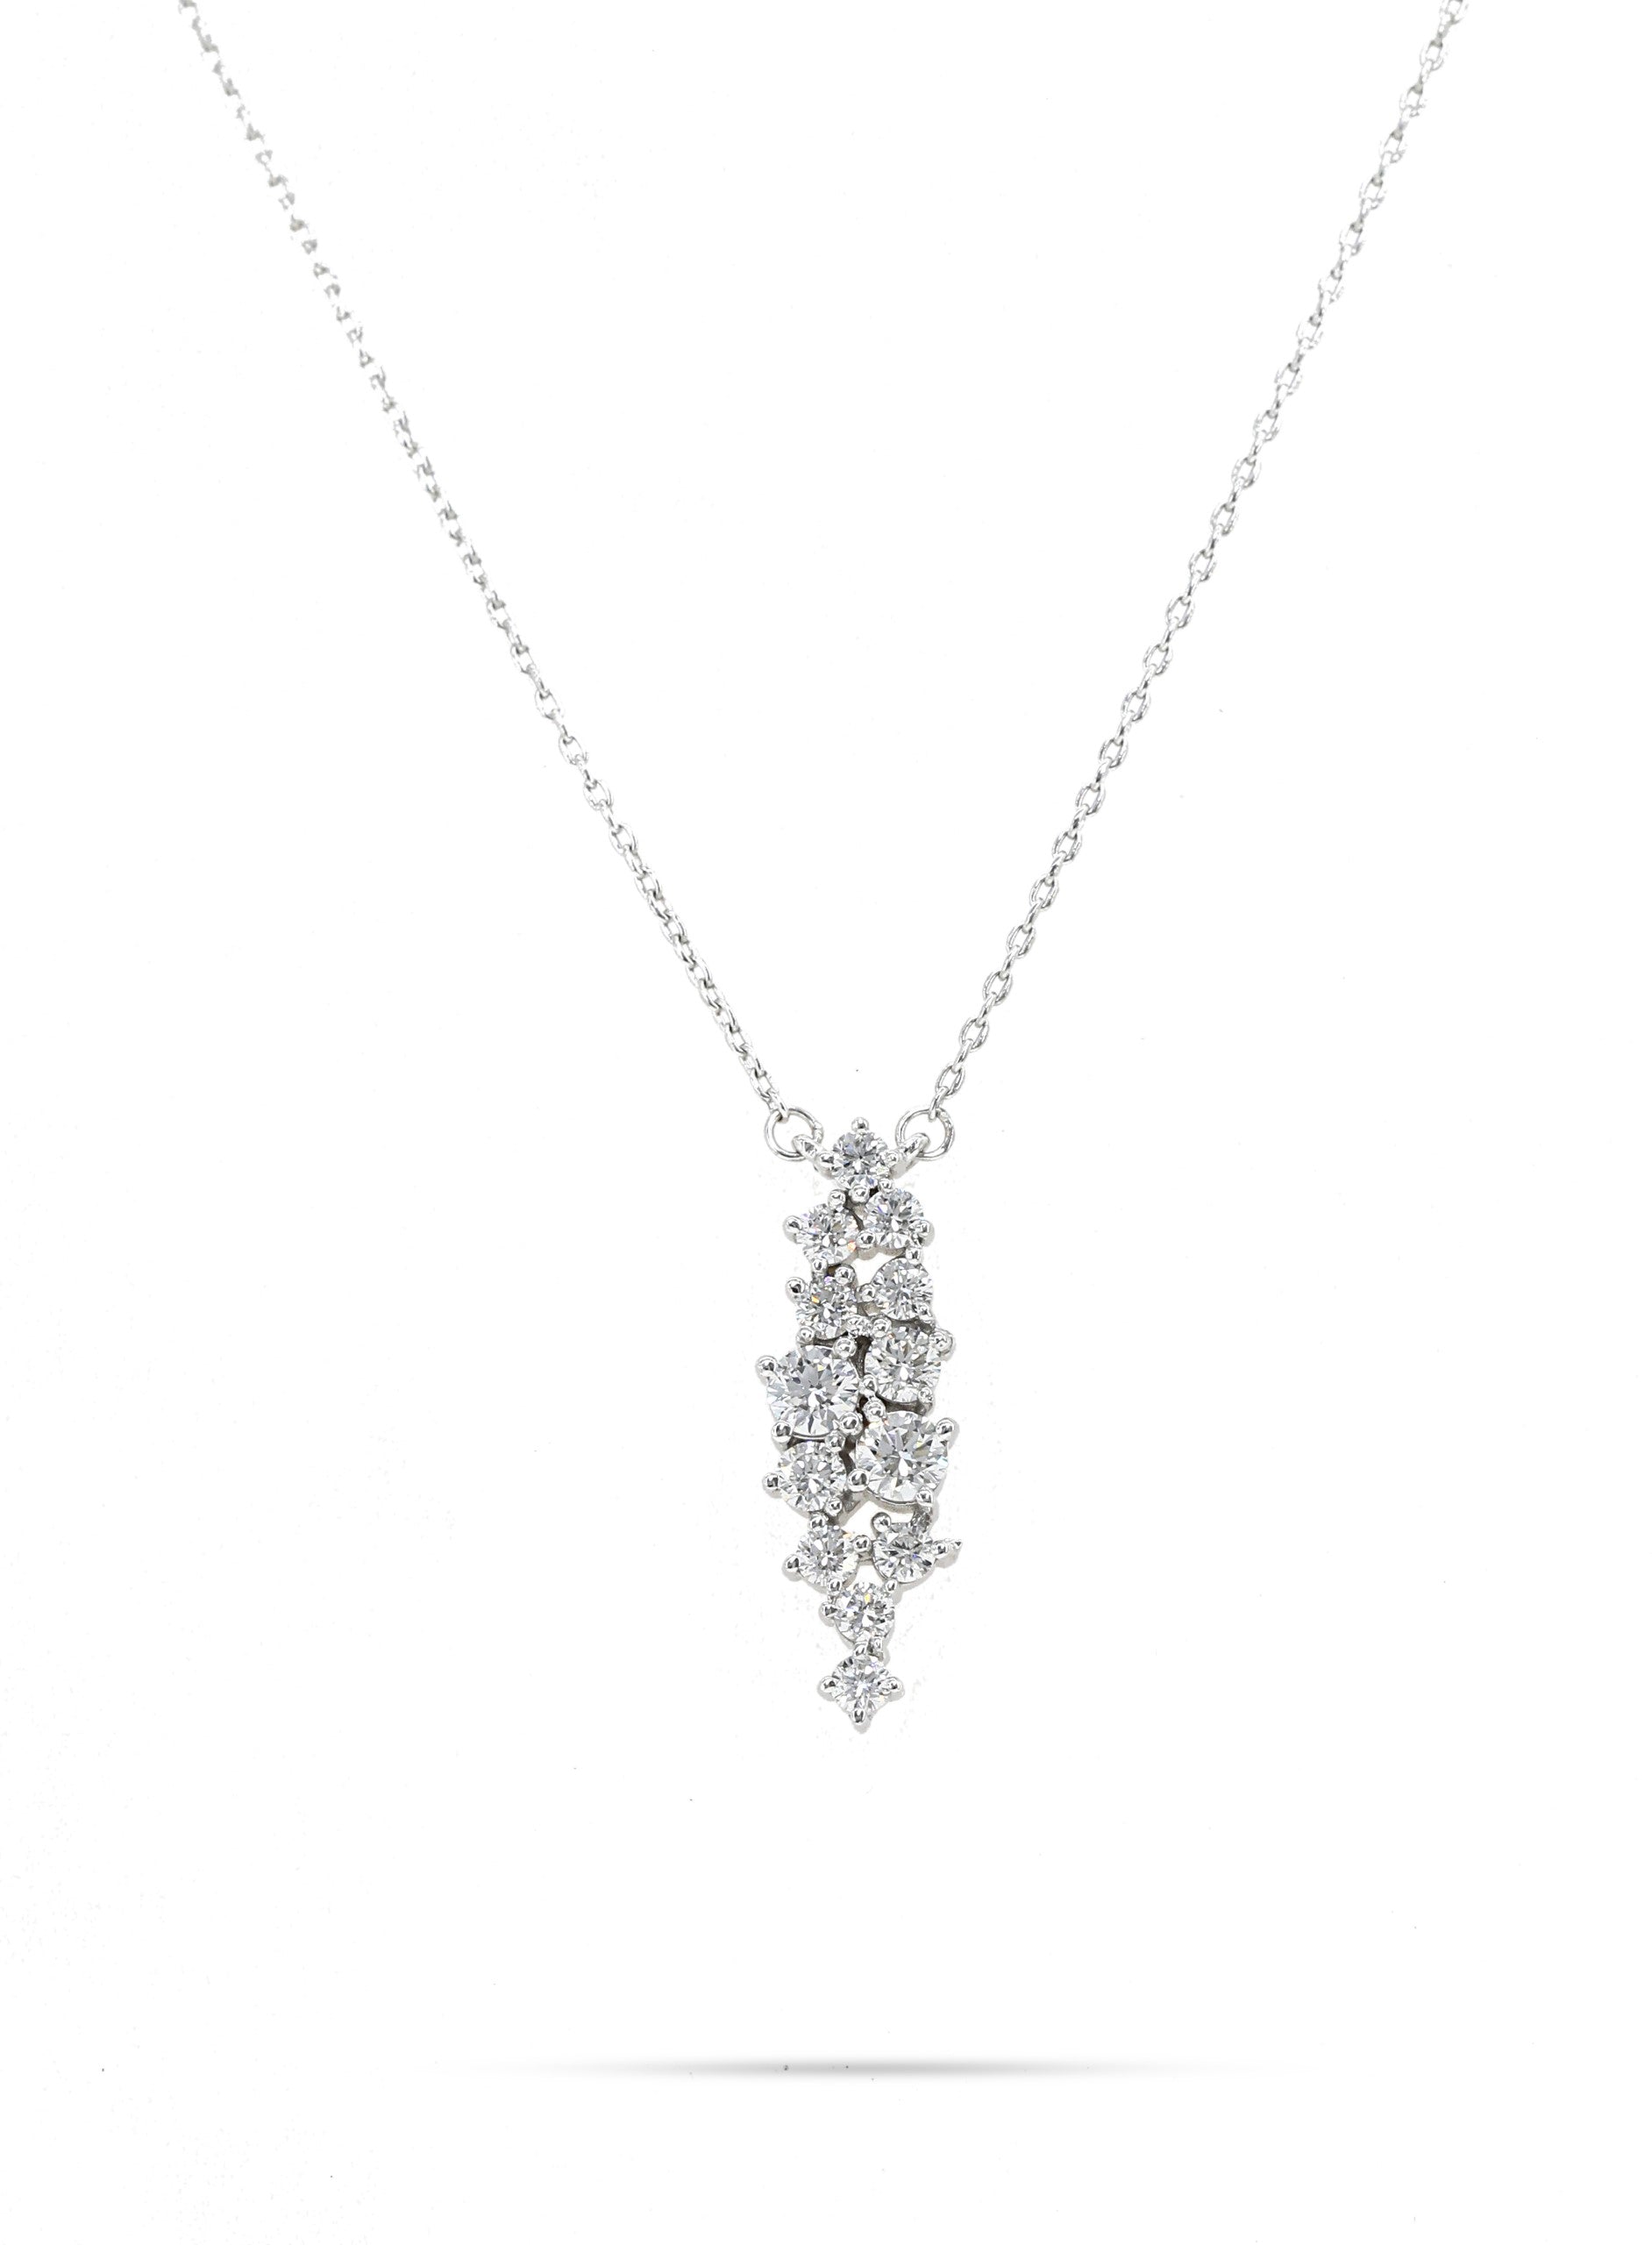 Dangling Geometrical Shaped Diamond Necklace in 18K White Gold - SIR1129